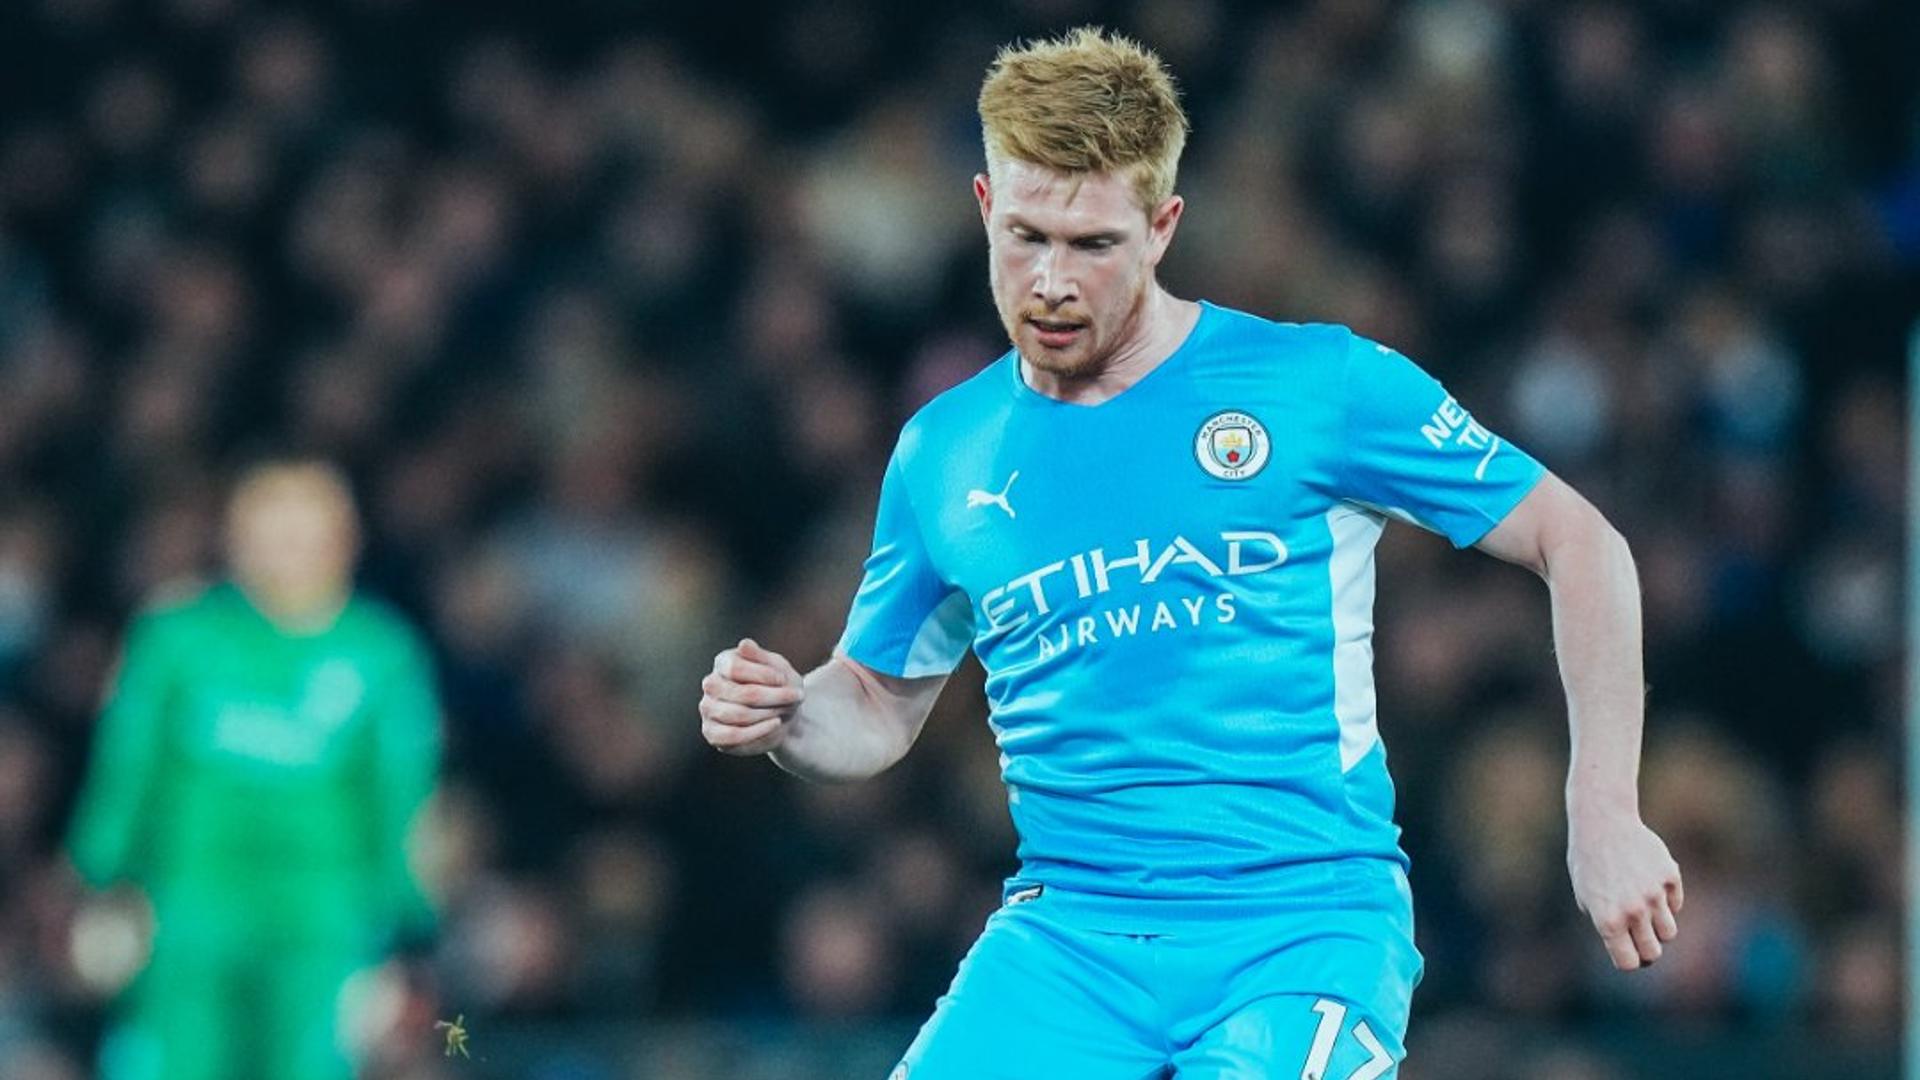 Kevin De Bruyne in action, Credit: Twitter/@ManCity